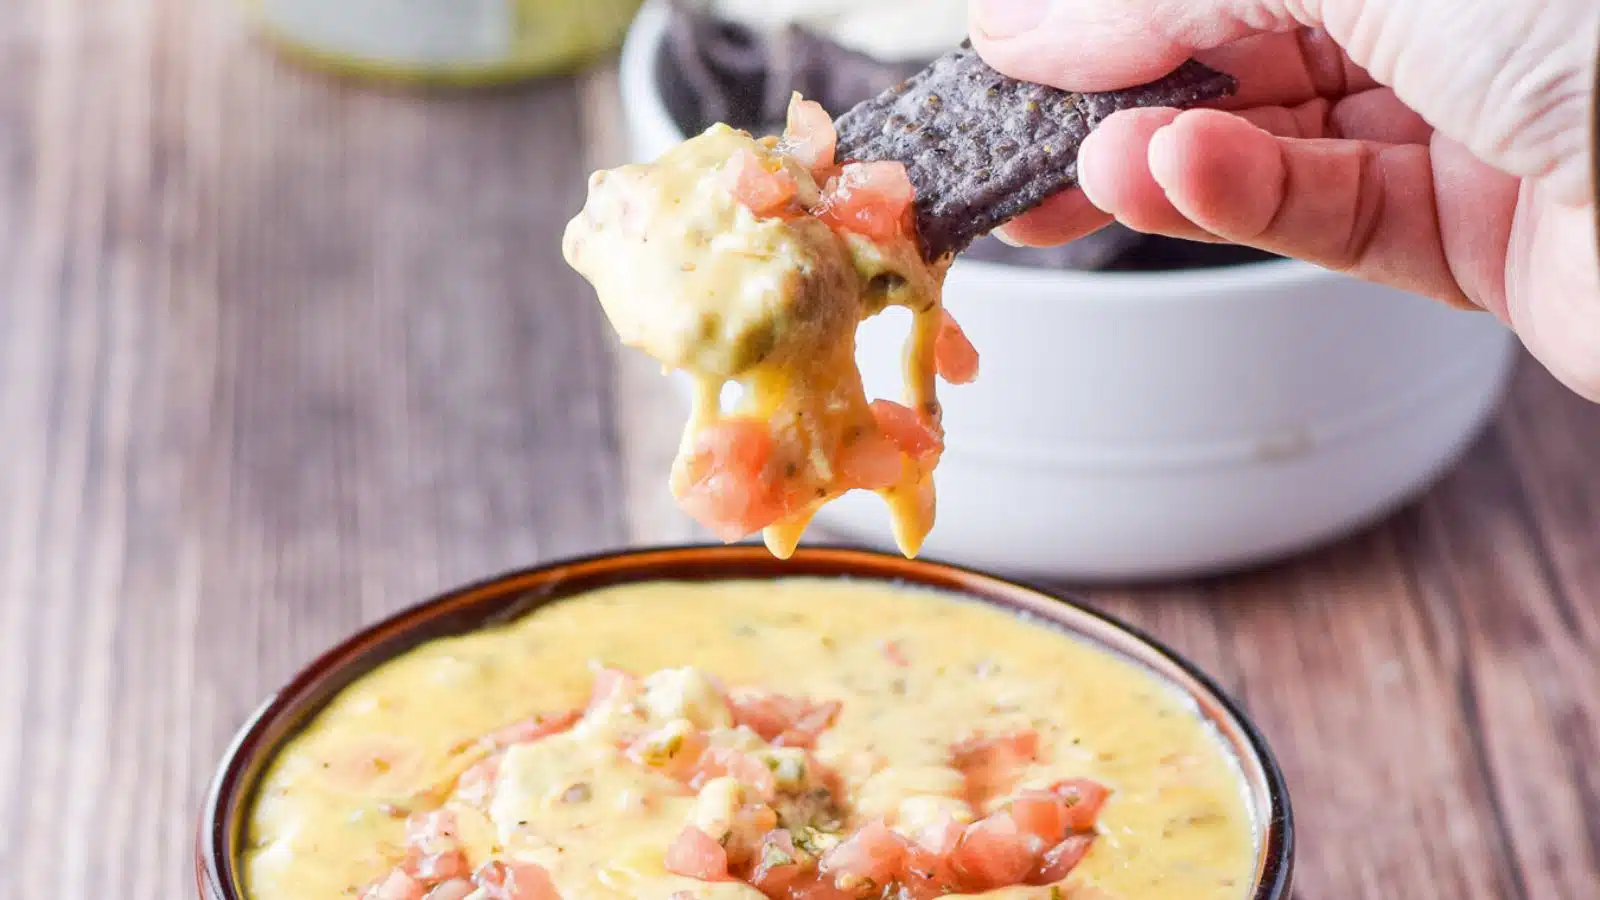 A hand holding a blue chip dipped into the cheese and tomato dip